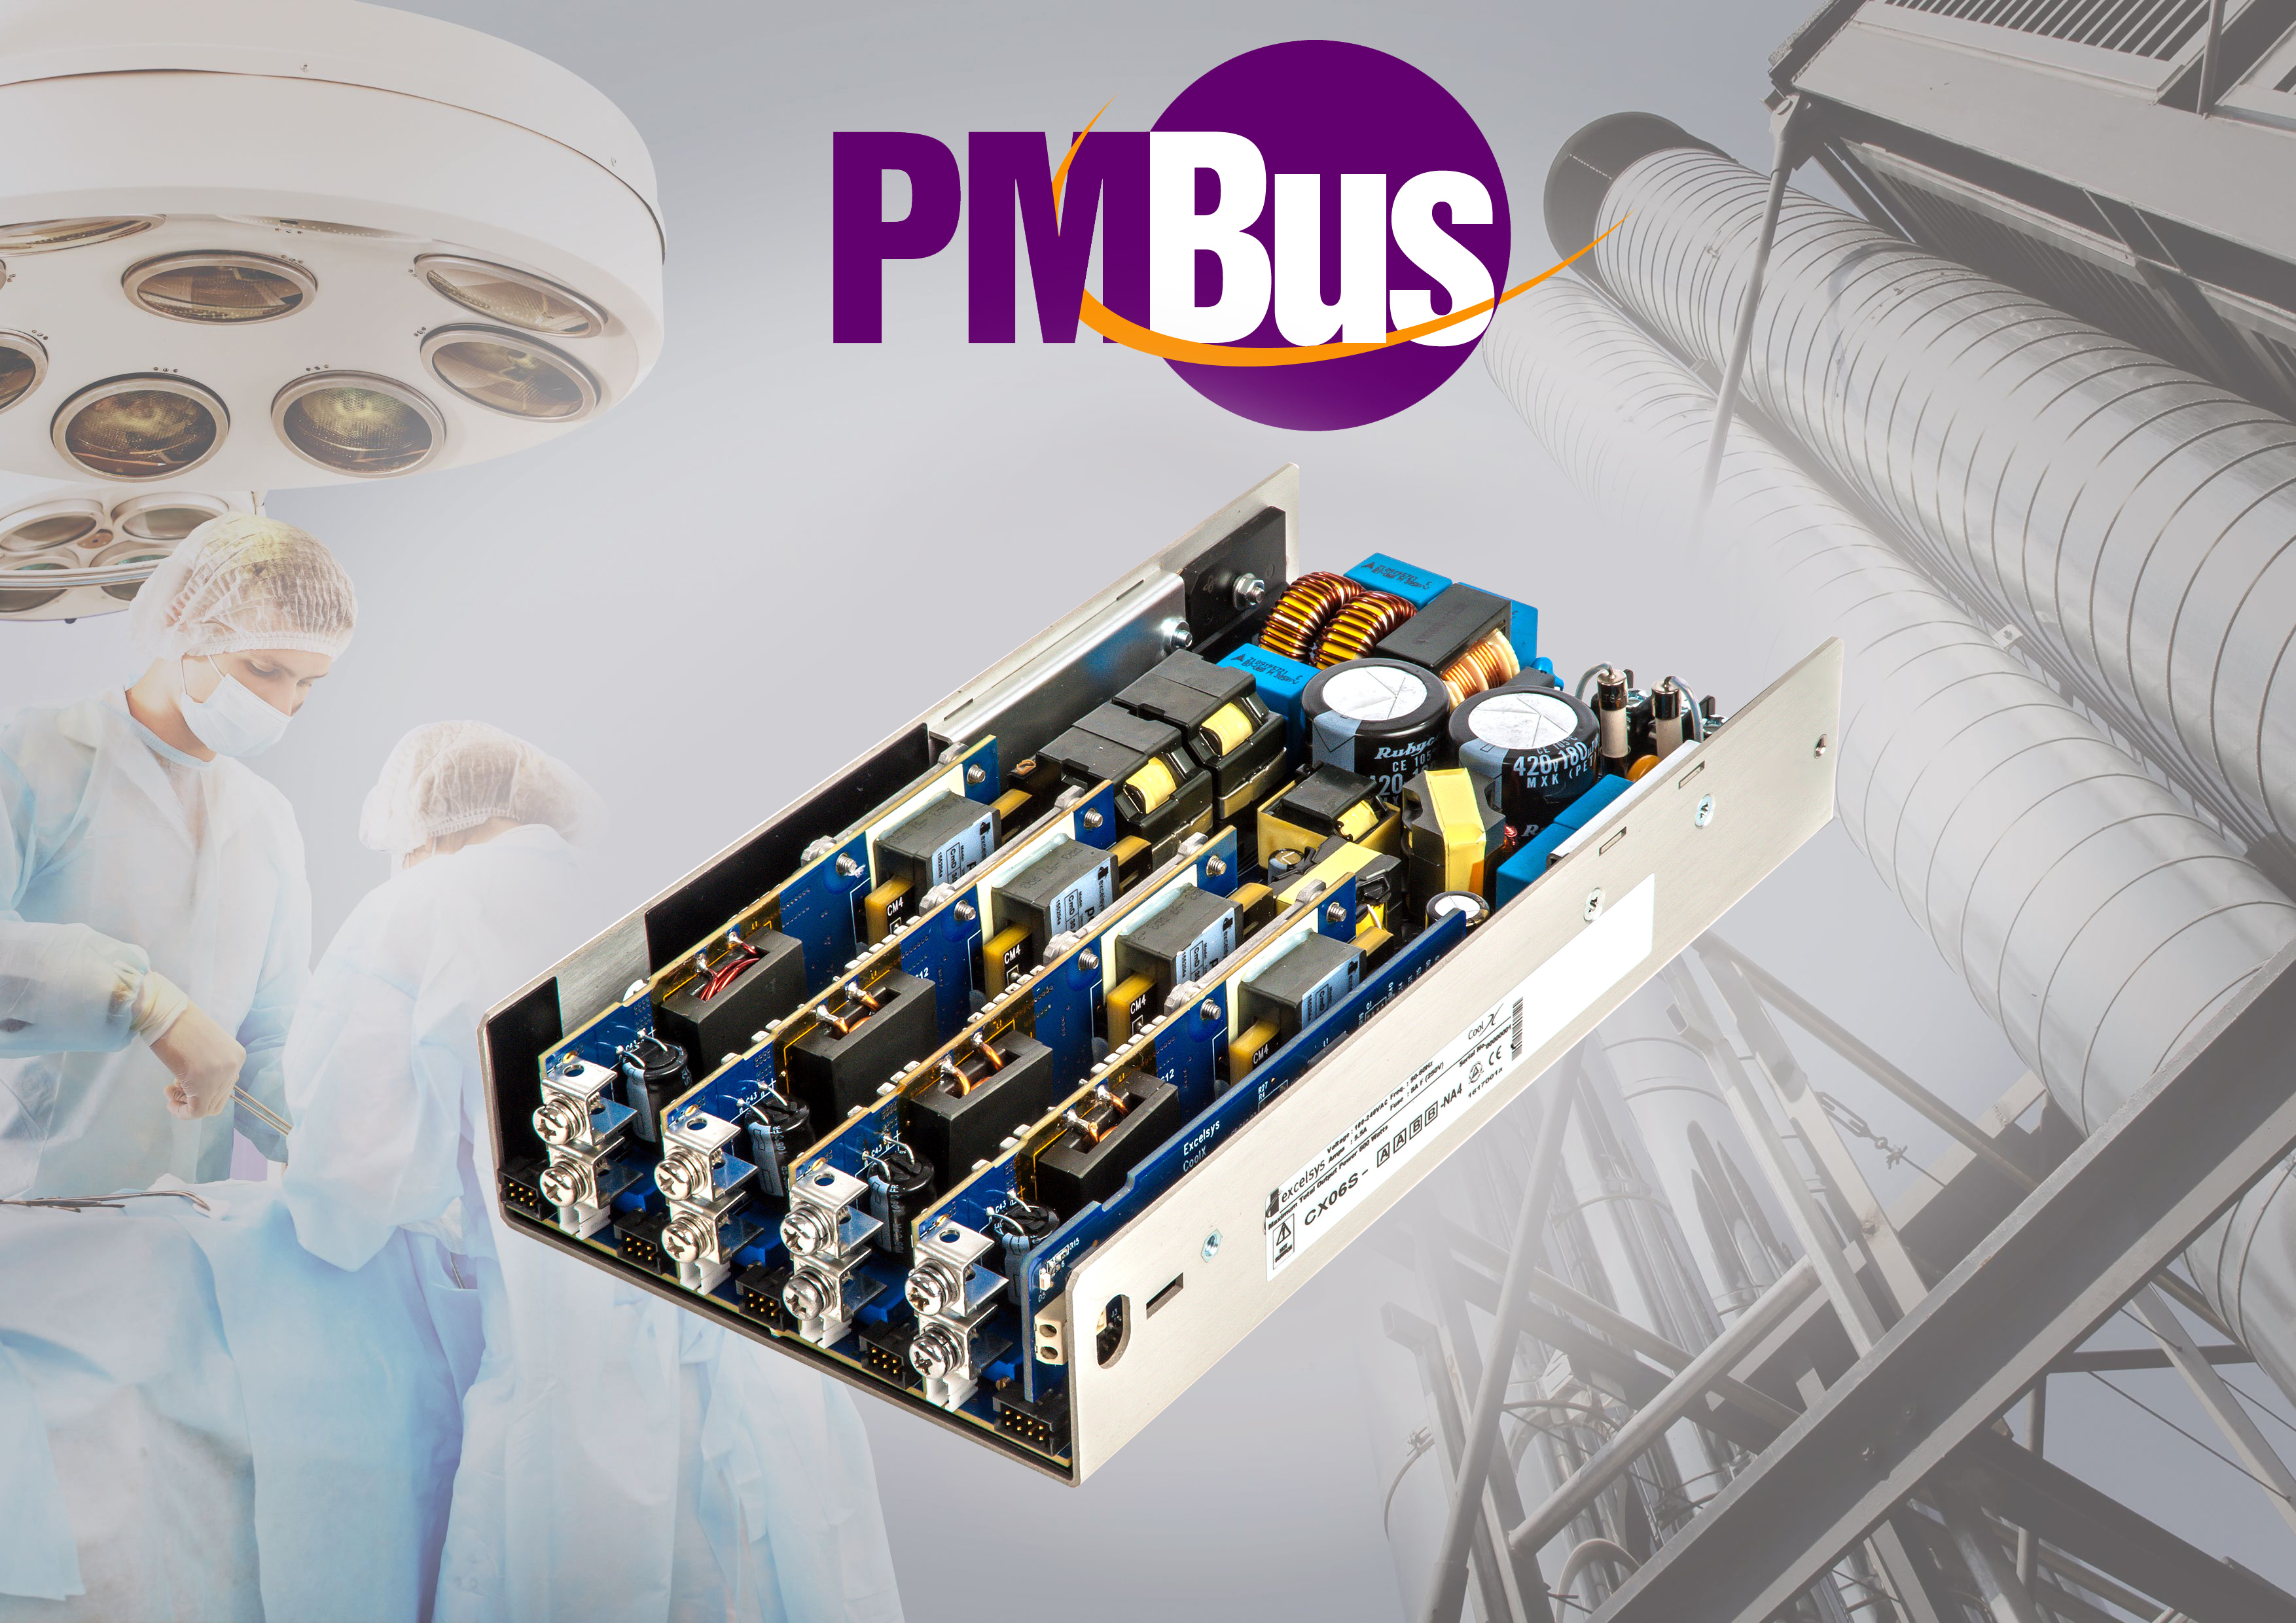 Excelsys CoolX600 convection cooled 600W power supplies now feature PMBus Communication